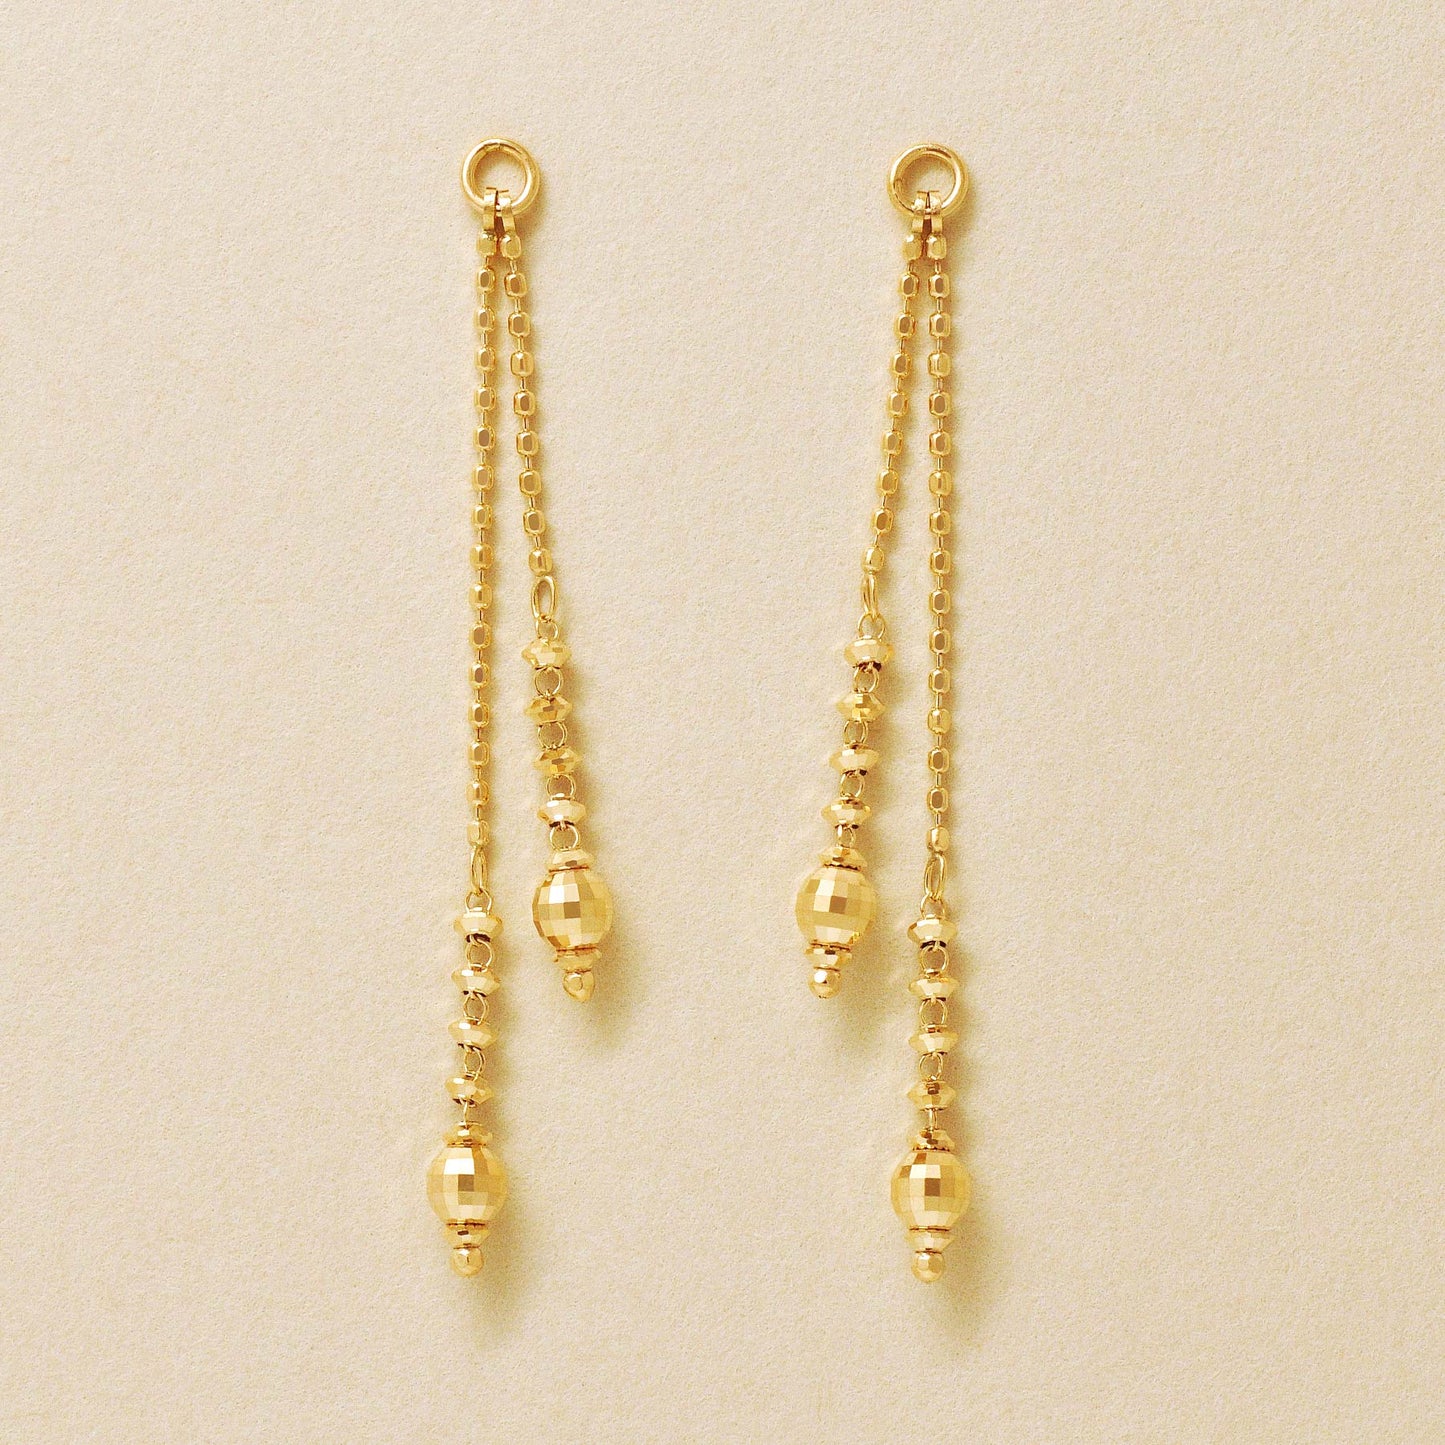 [Palette] Twin Mirror Earring Charms (10K Yellow Gold) - Product Image